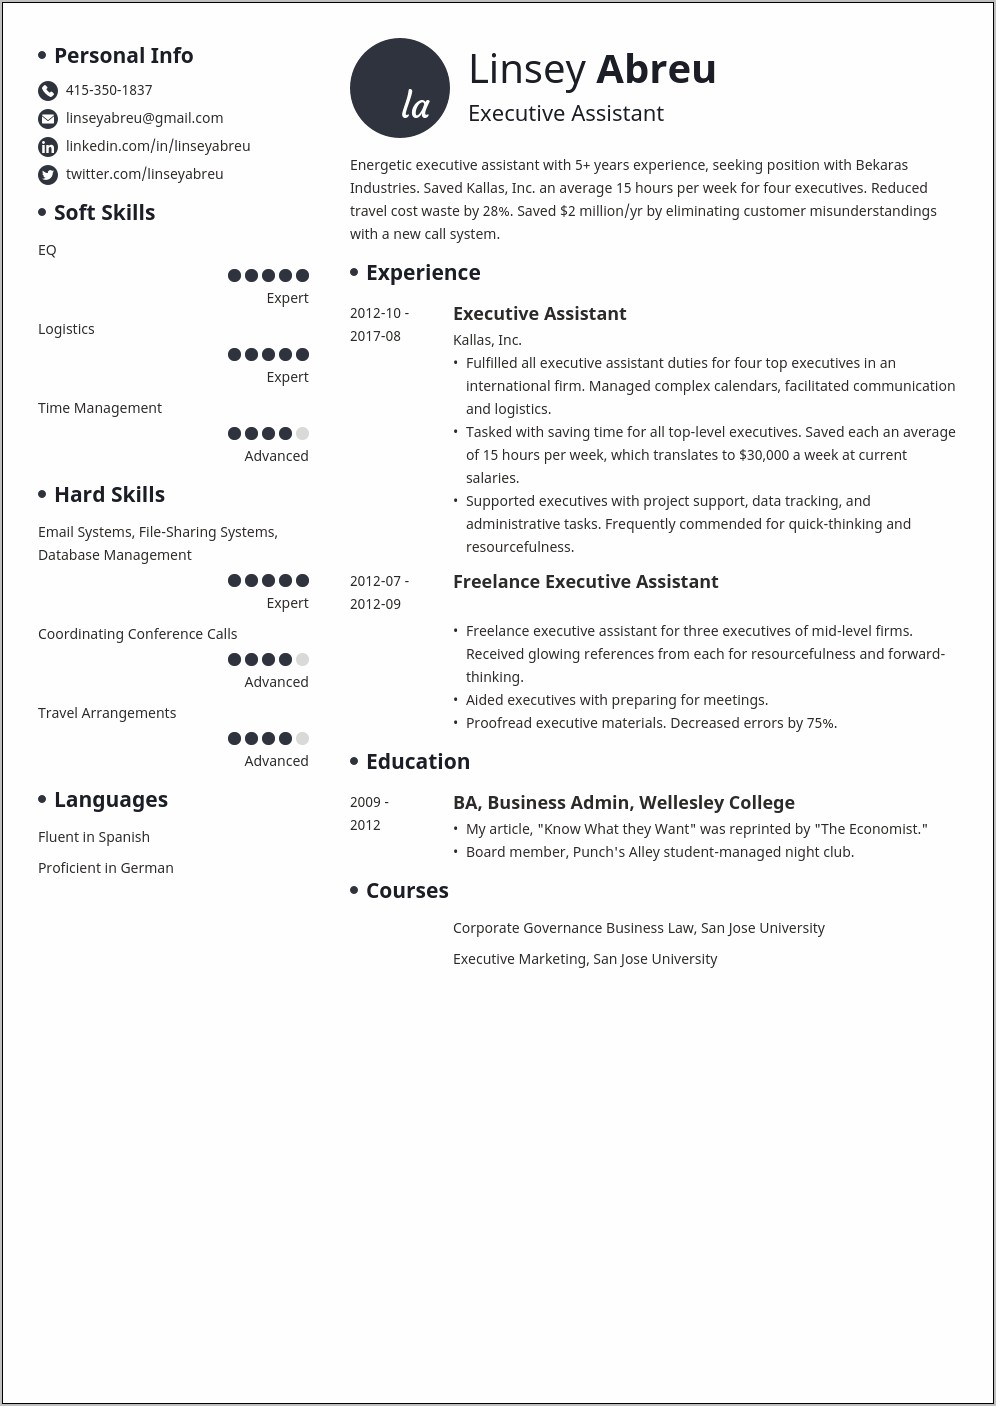 Sample Resume For Executive Assistant To President